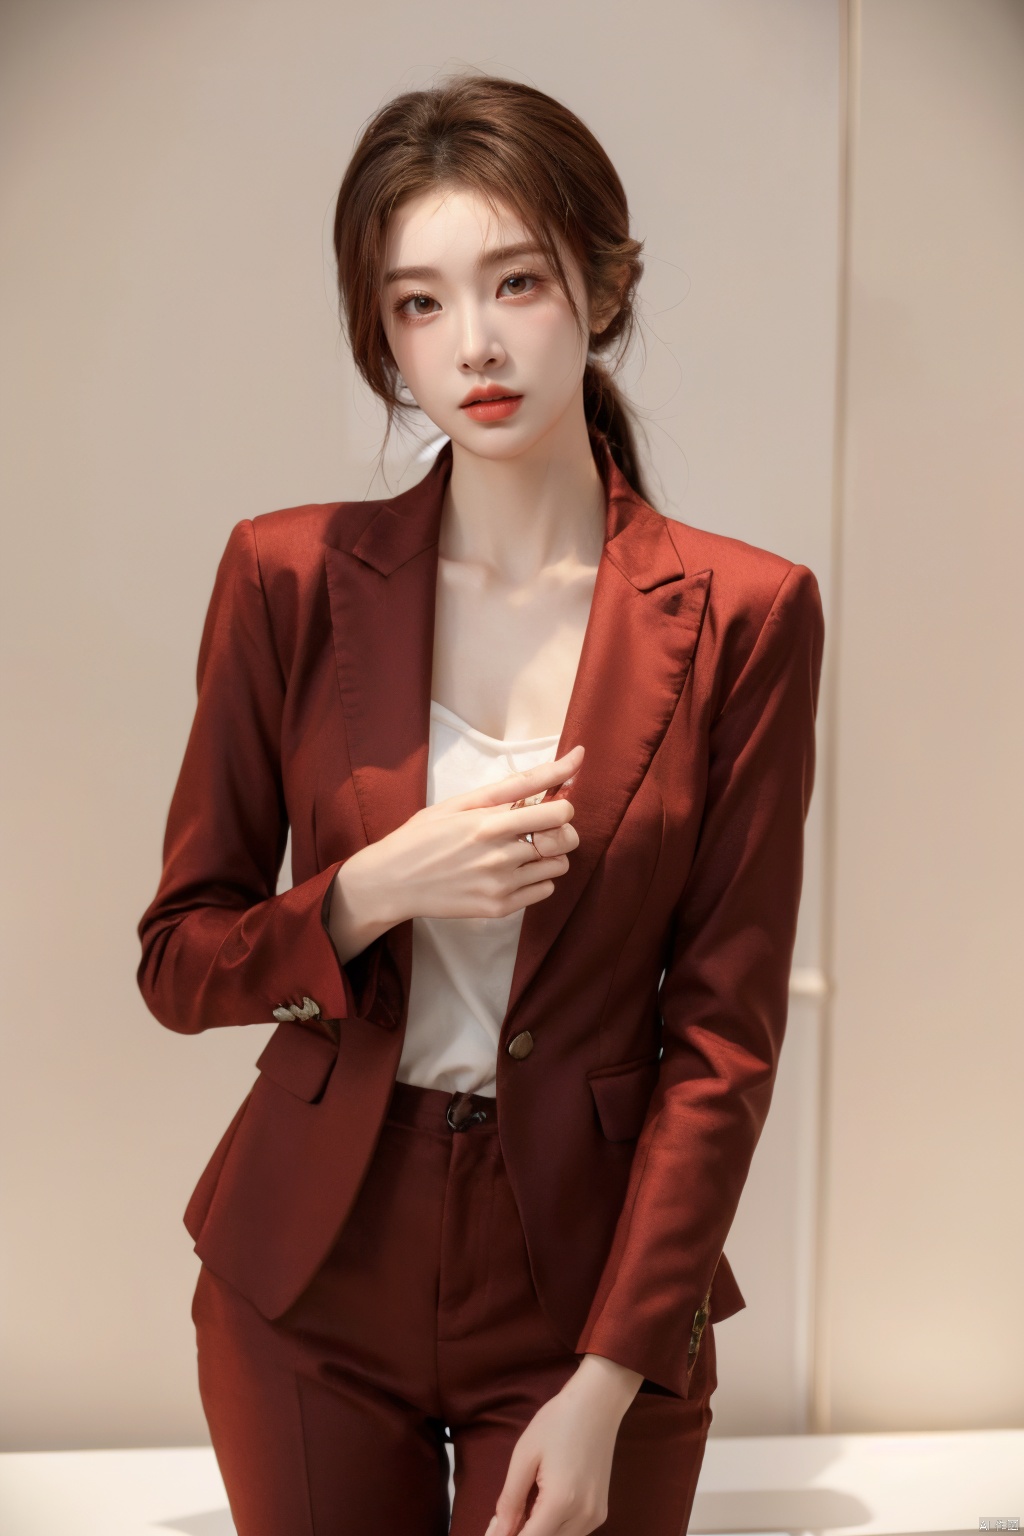  Girl, suit, pretty face, (photo reality: 1.3) , Edge lighting, (high detail skin: 1.2) , 8K Ultra HD, high quality, high resolution, best ratio four fingers and one thumb, (photo reality: 1.3) , wear a red suit jacket, white shirt inside, large breasts, solid color background, solid red background, high-grade feeling, texture pull full, 1 girl,Xlongni, desert_sky, hanfu, Water_butterfly